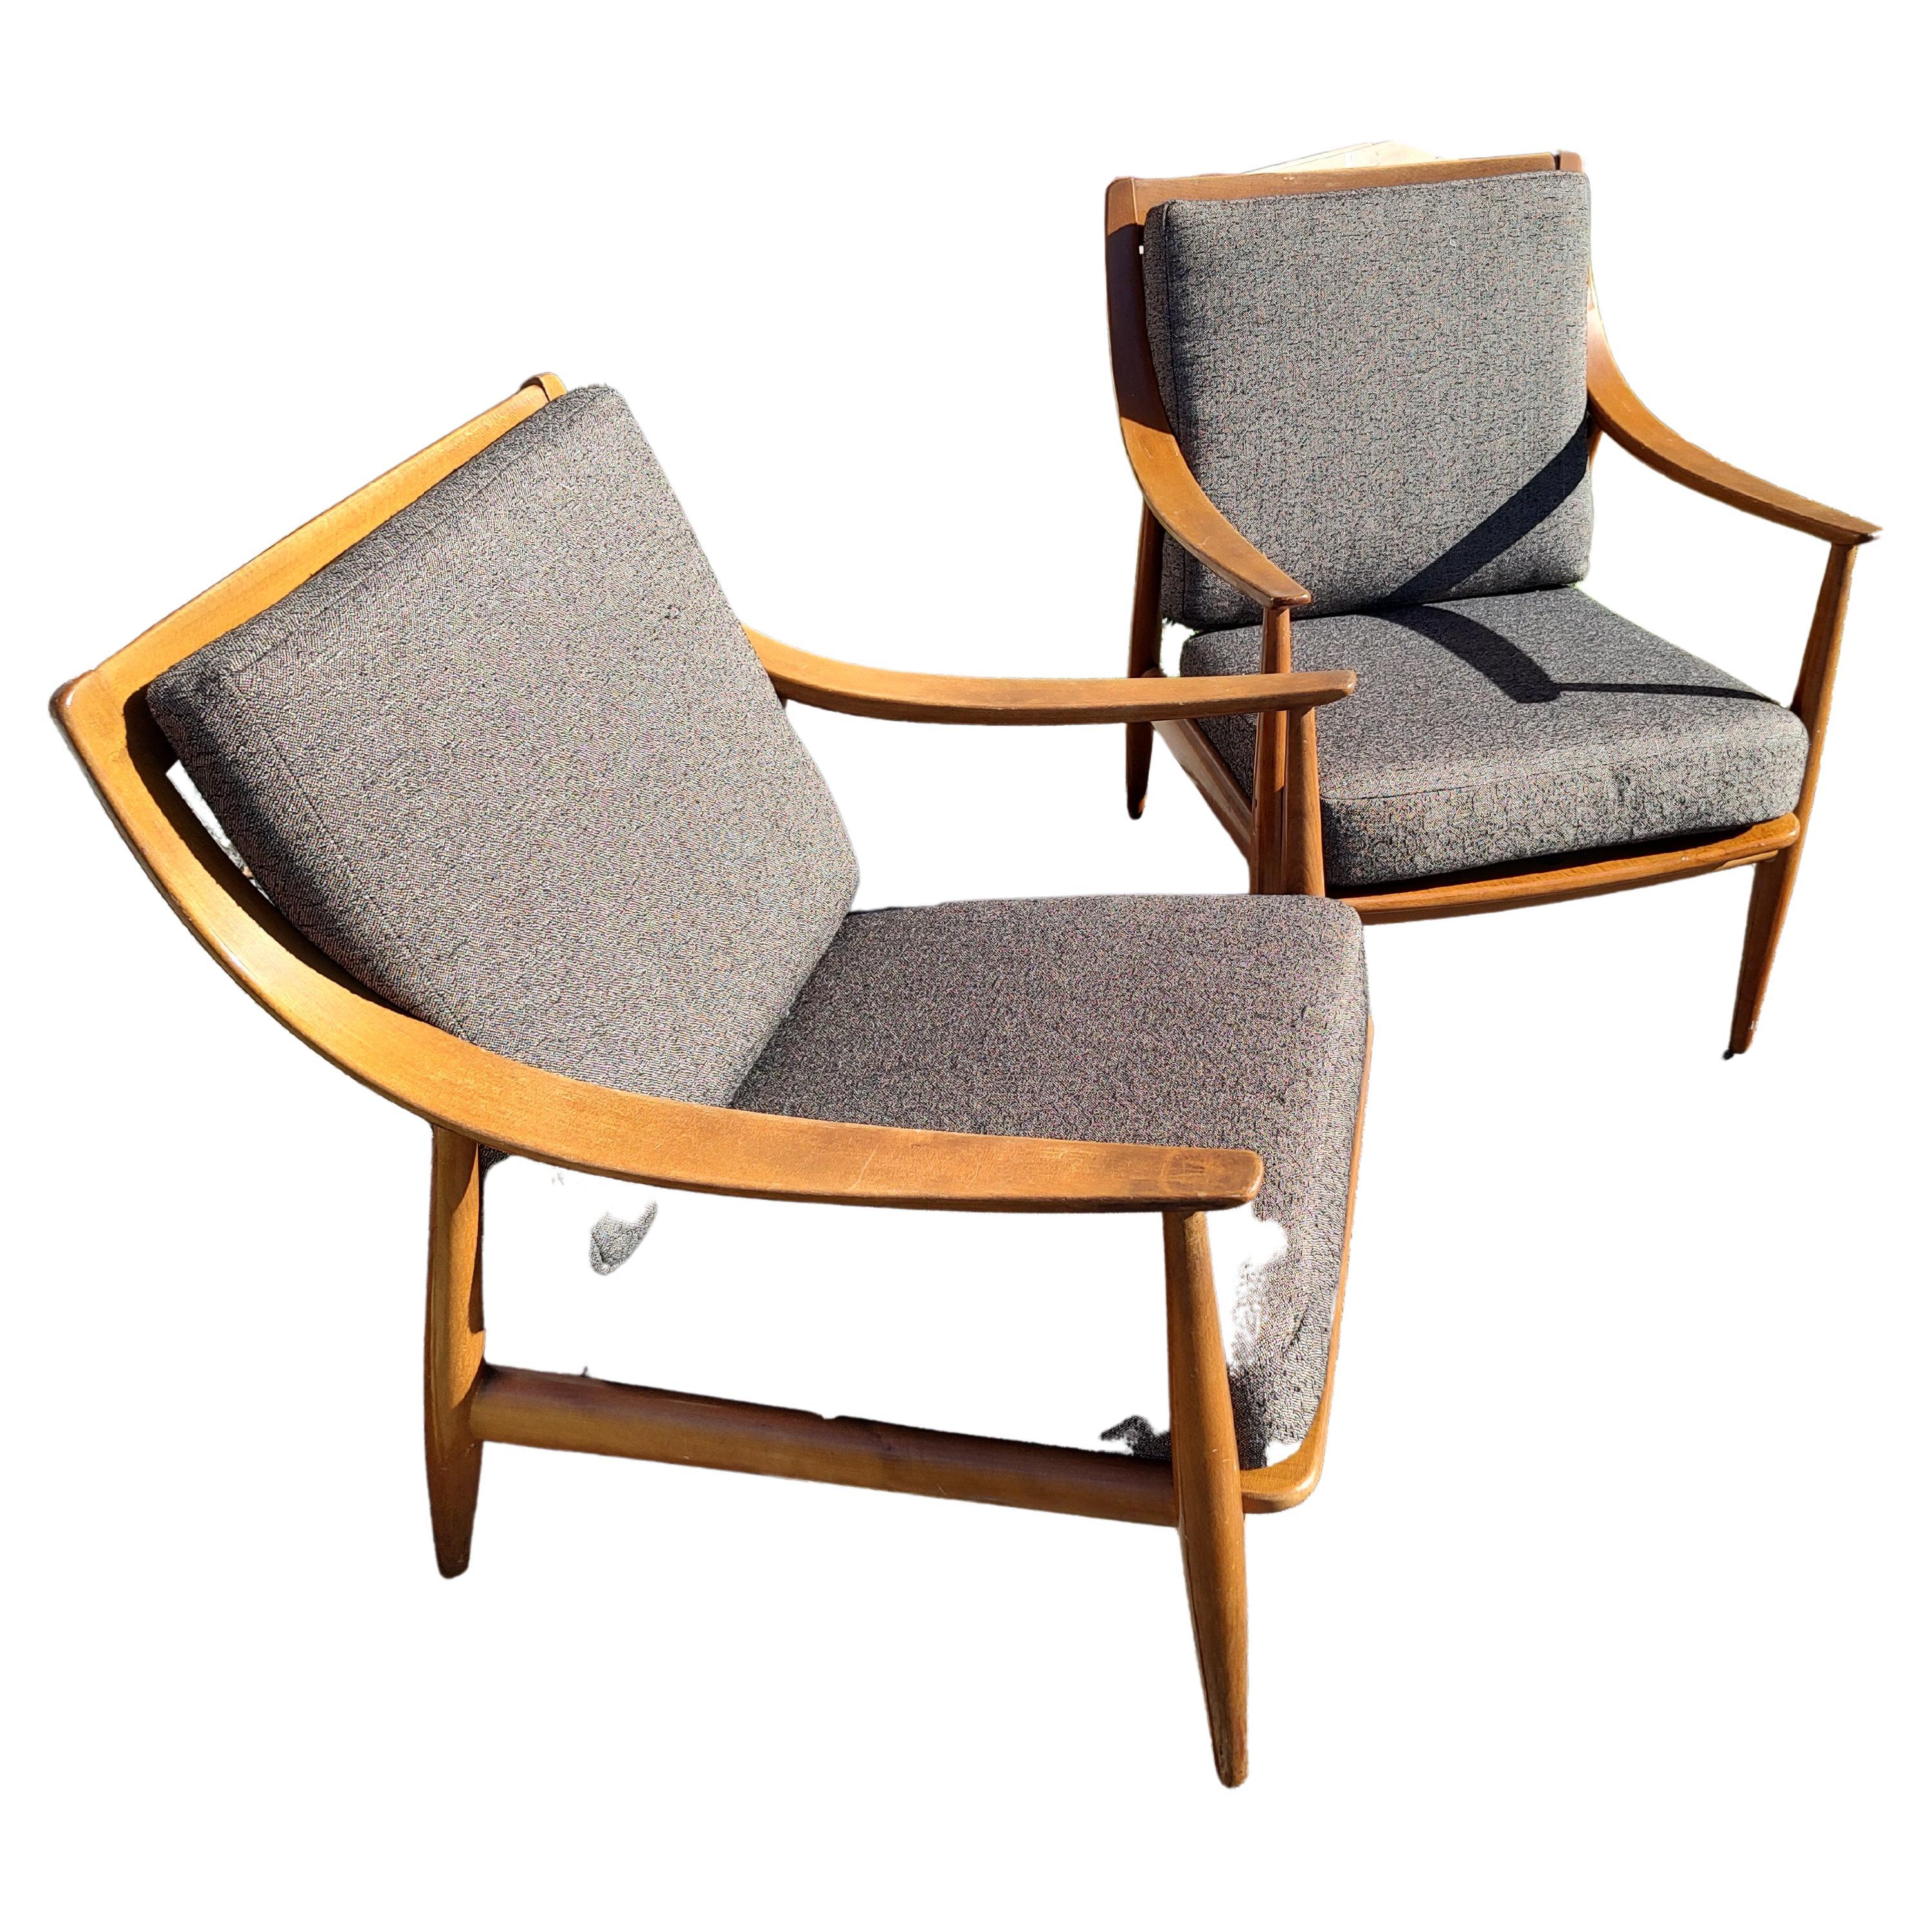 Beautiful pair of Mid-Century Modern sculptural Scandinavian designed chairs by Peter Hvidt and Olga Molgaard Neilson for John Stuart Inc. Created out of walnut with sloping curved arms and spindle backs. Brand new upholstery gives a great look and